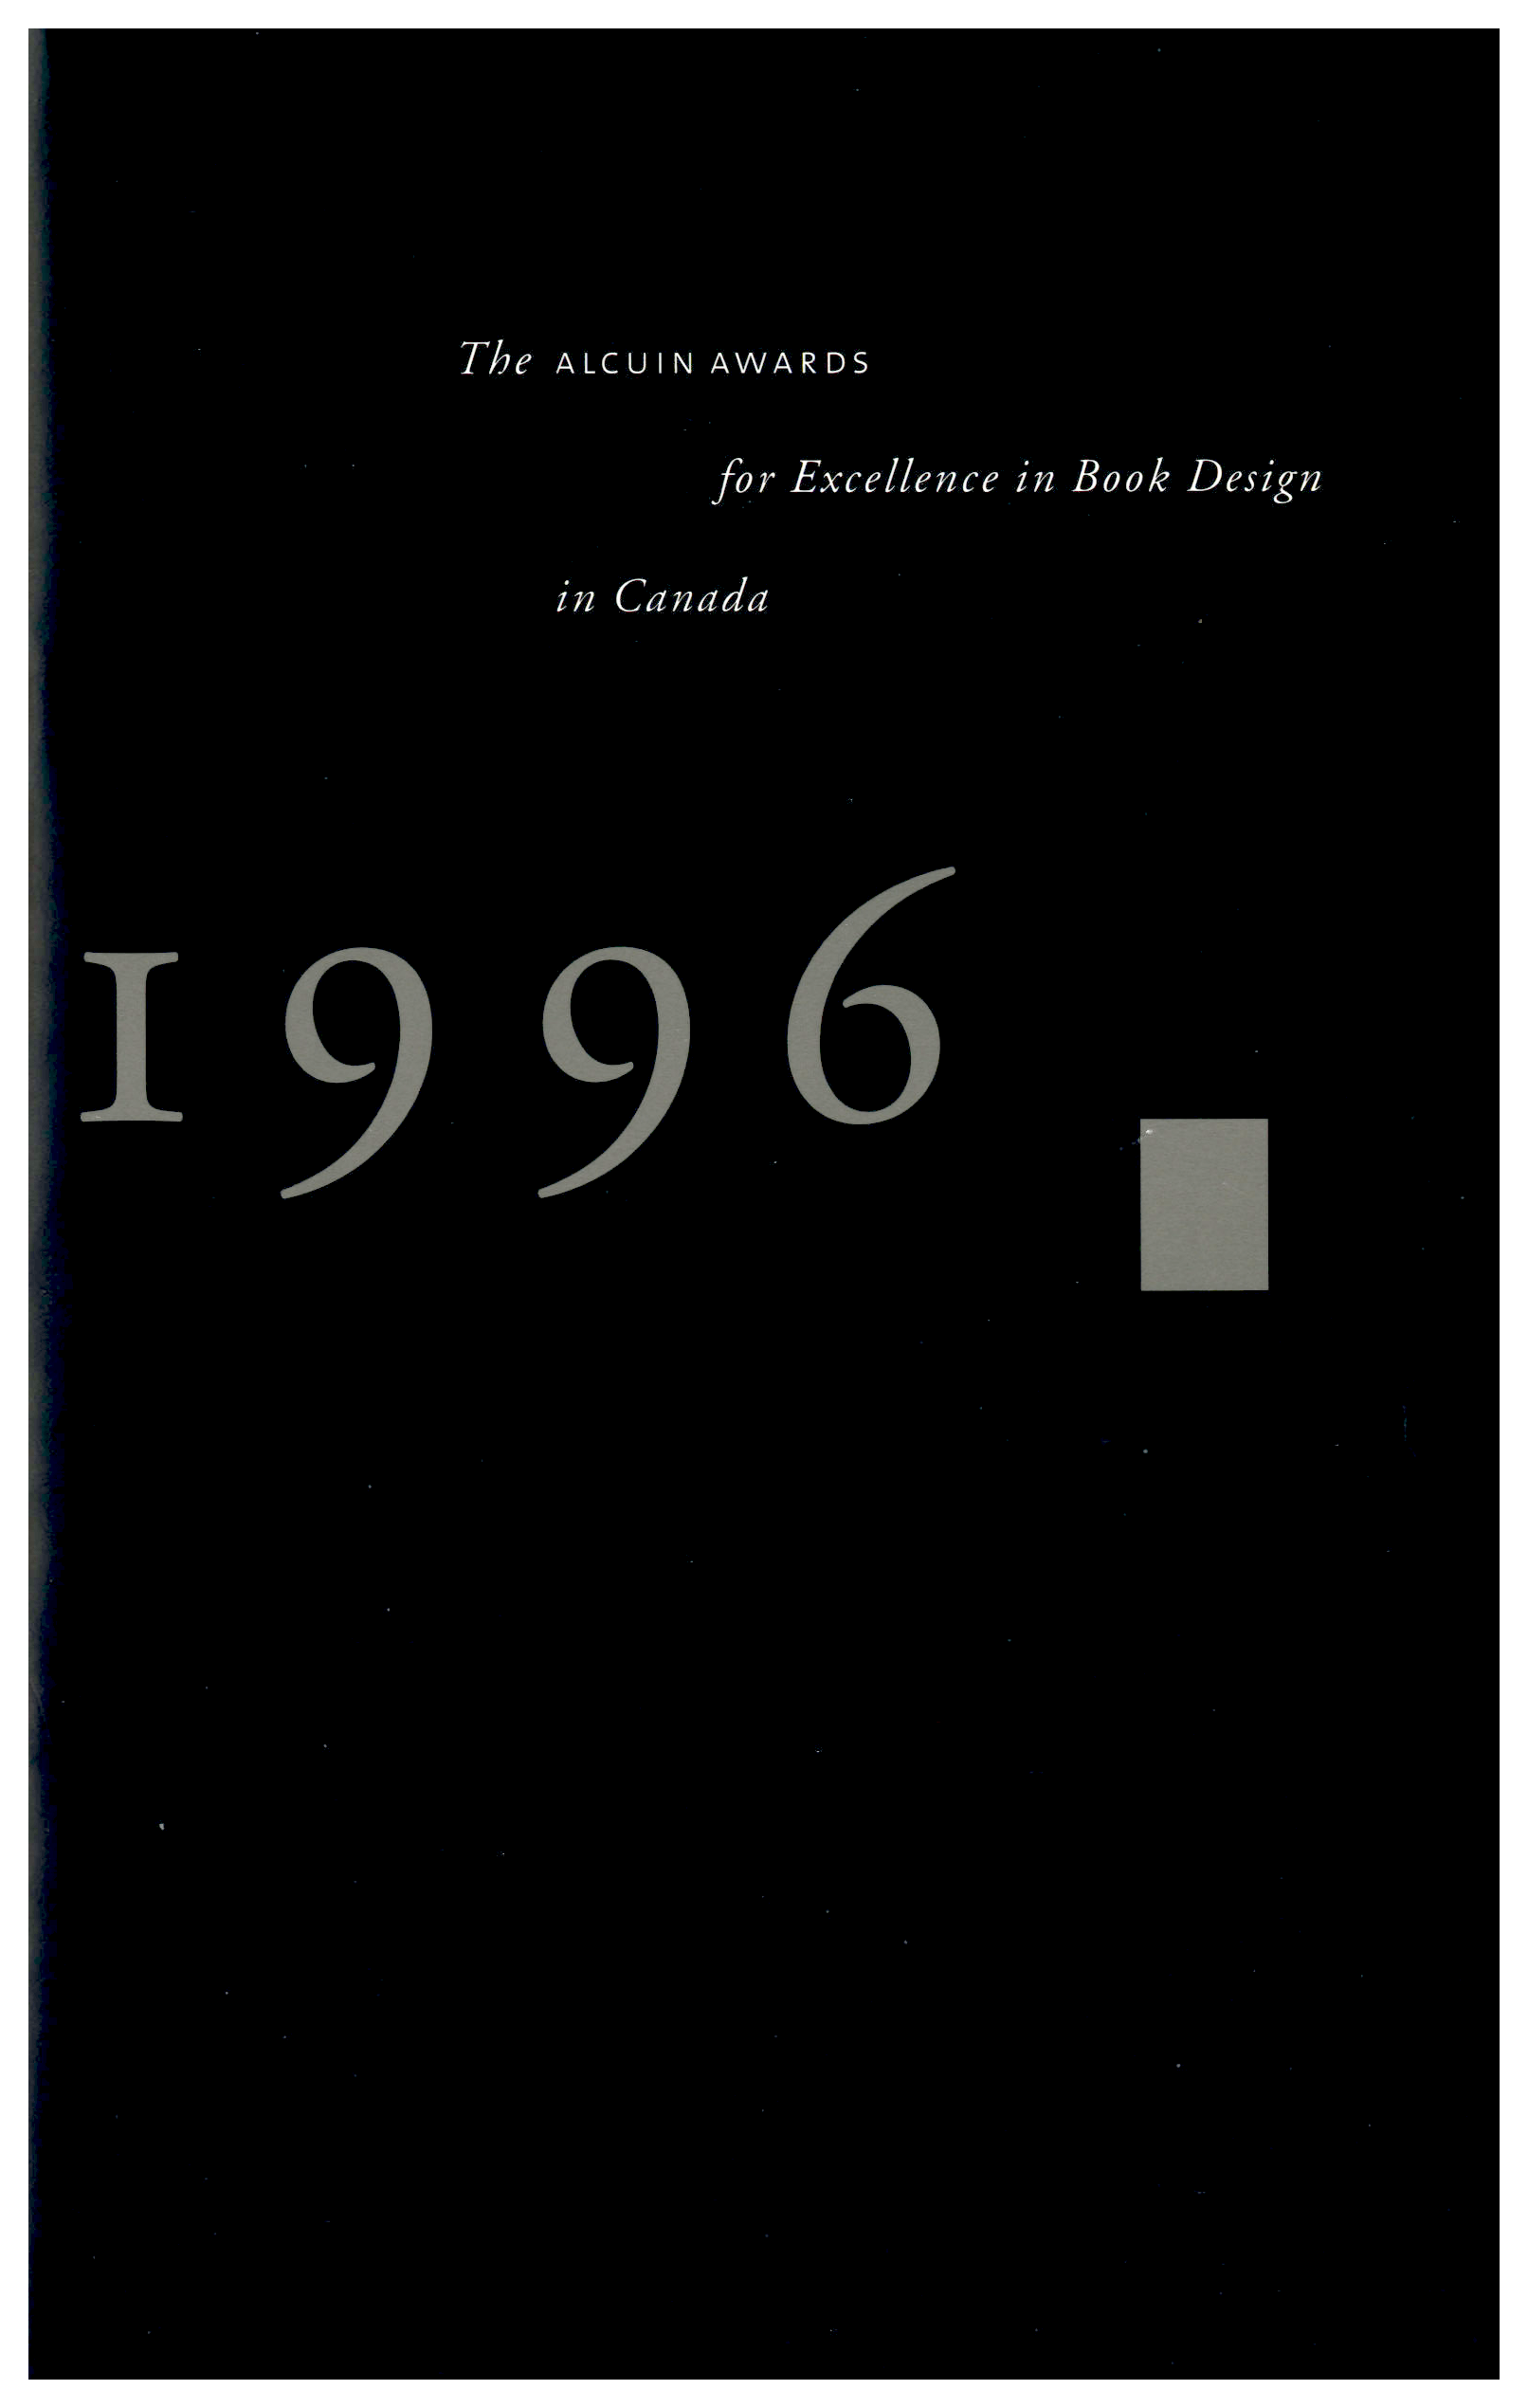 Cover page for 1996 Alcuin Award Winner Catalogue